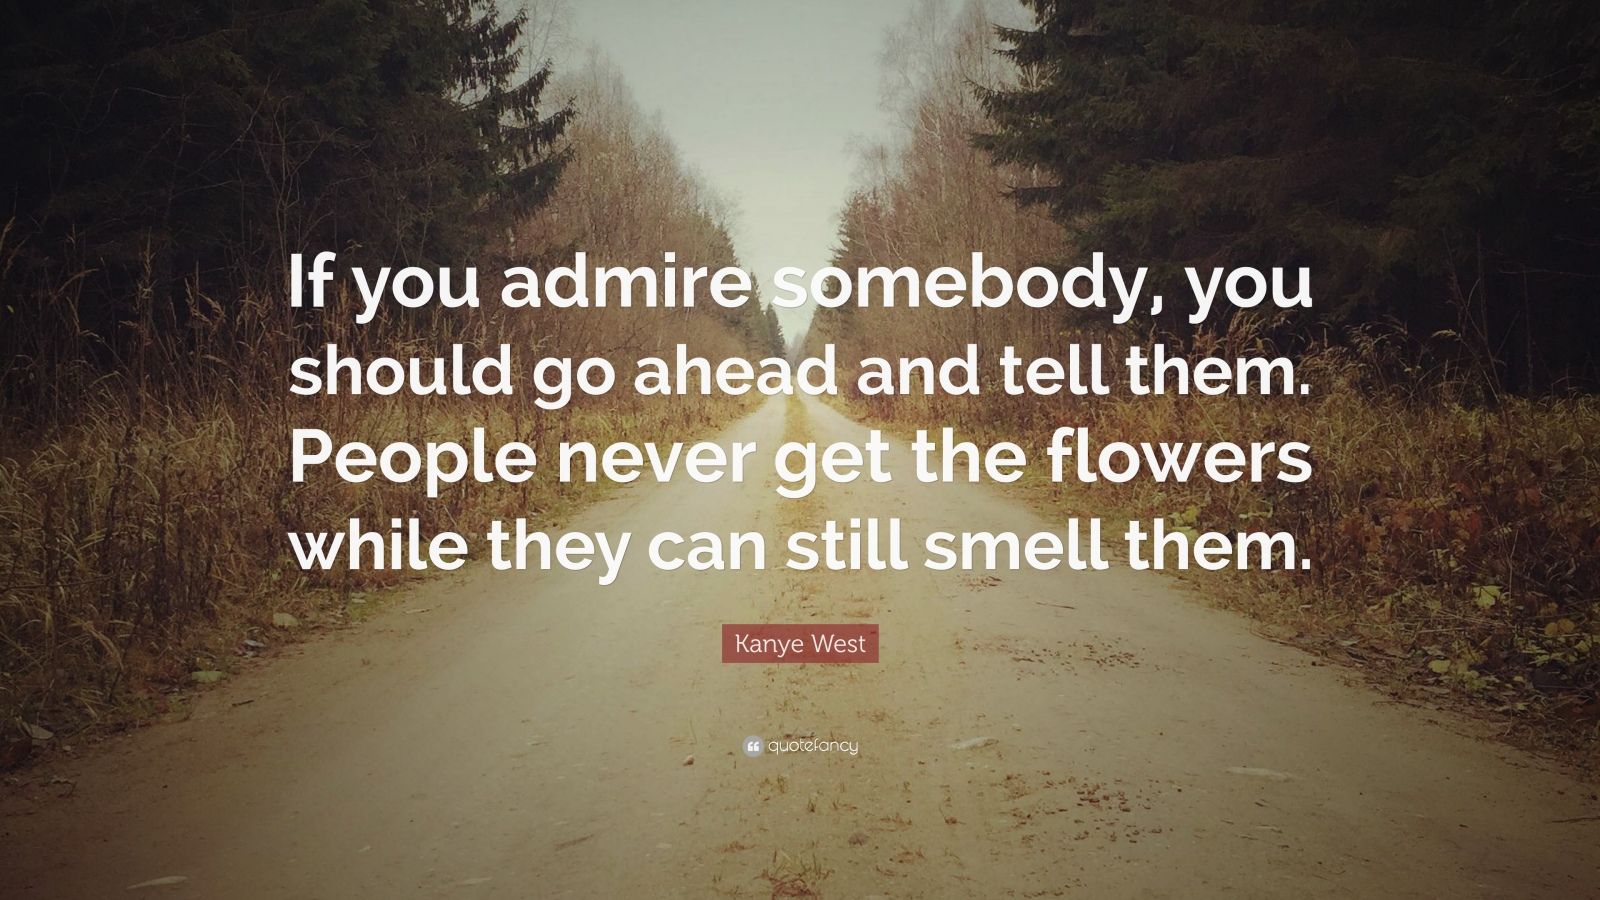 kanye west quote: "if you admire somebody, you should go ahead